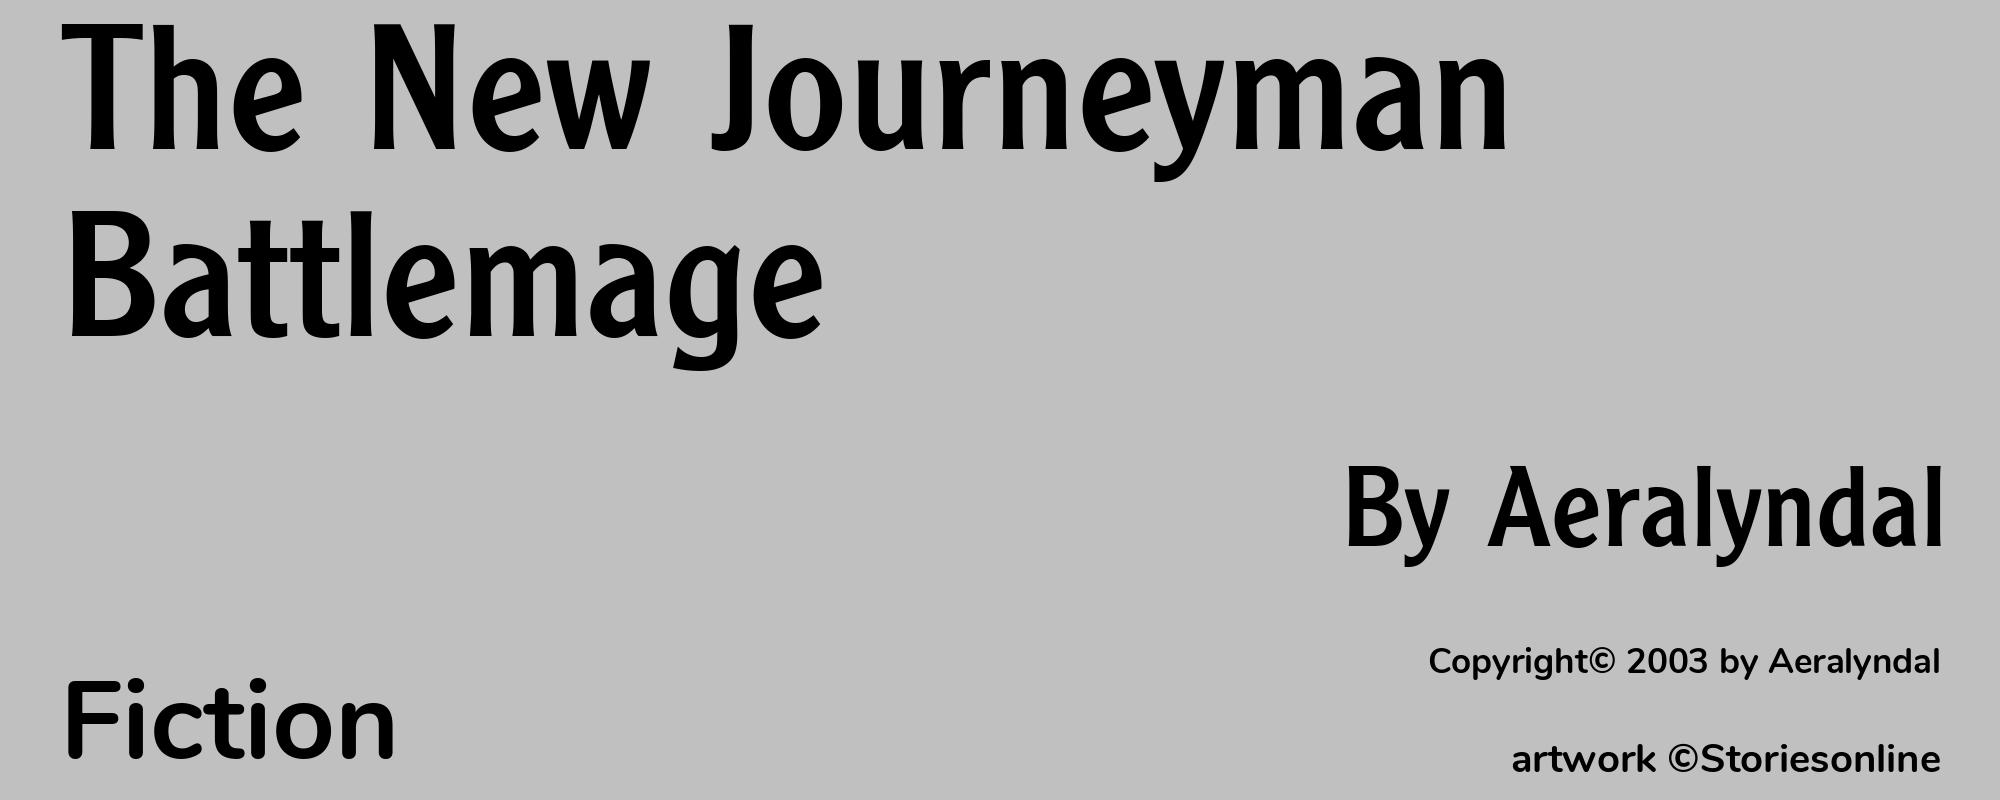 The New Journeyman Battlemage - Cover